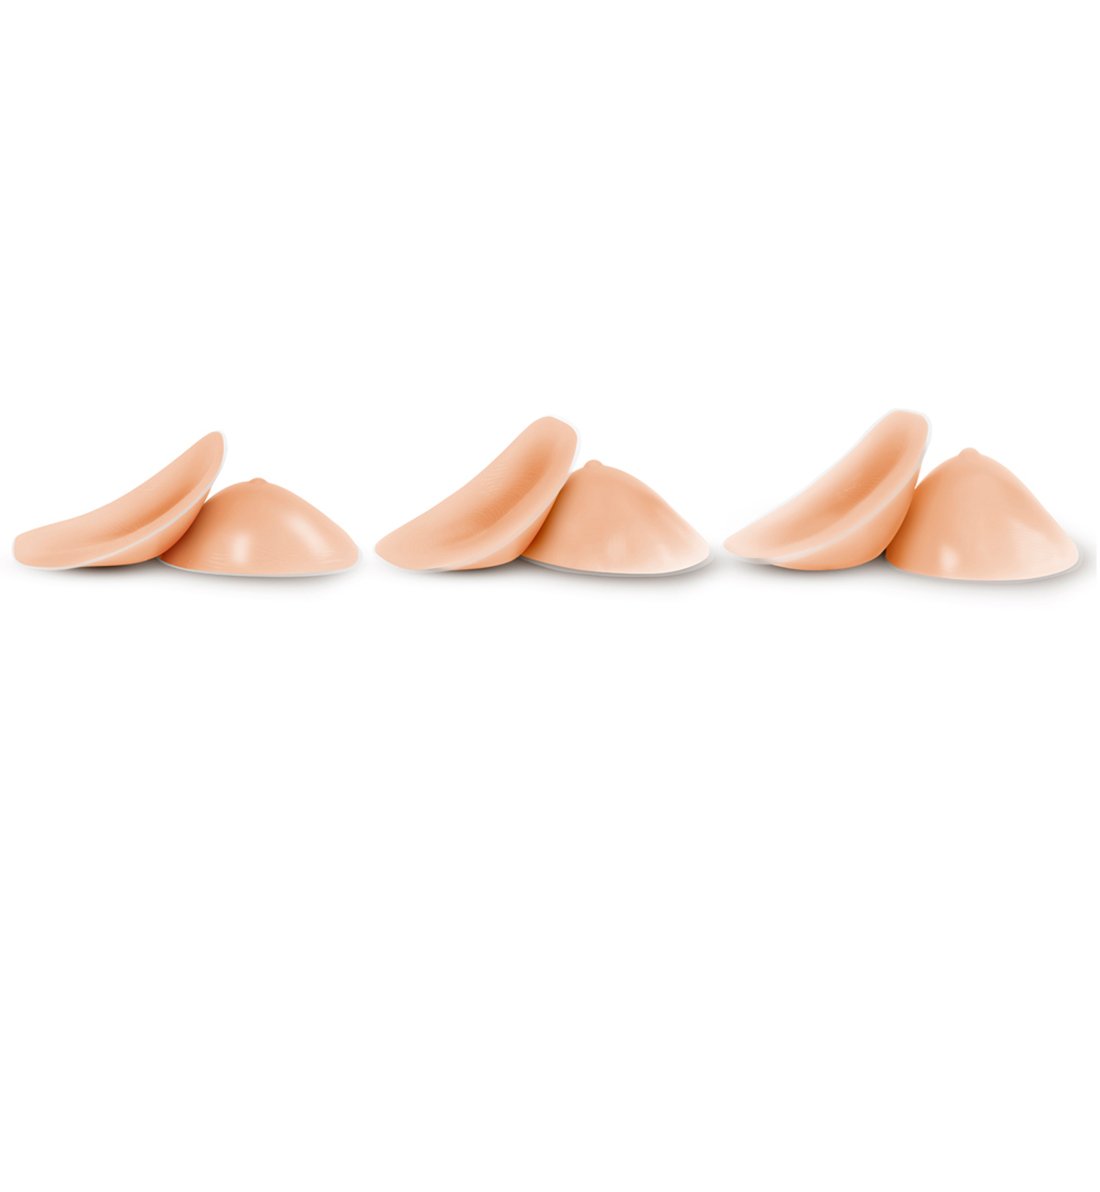 The NuBra Non-Adhesive Silicon Size Enhancer w/ Nipples (B106),Small,Nude - Nude,Small